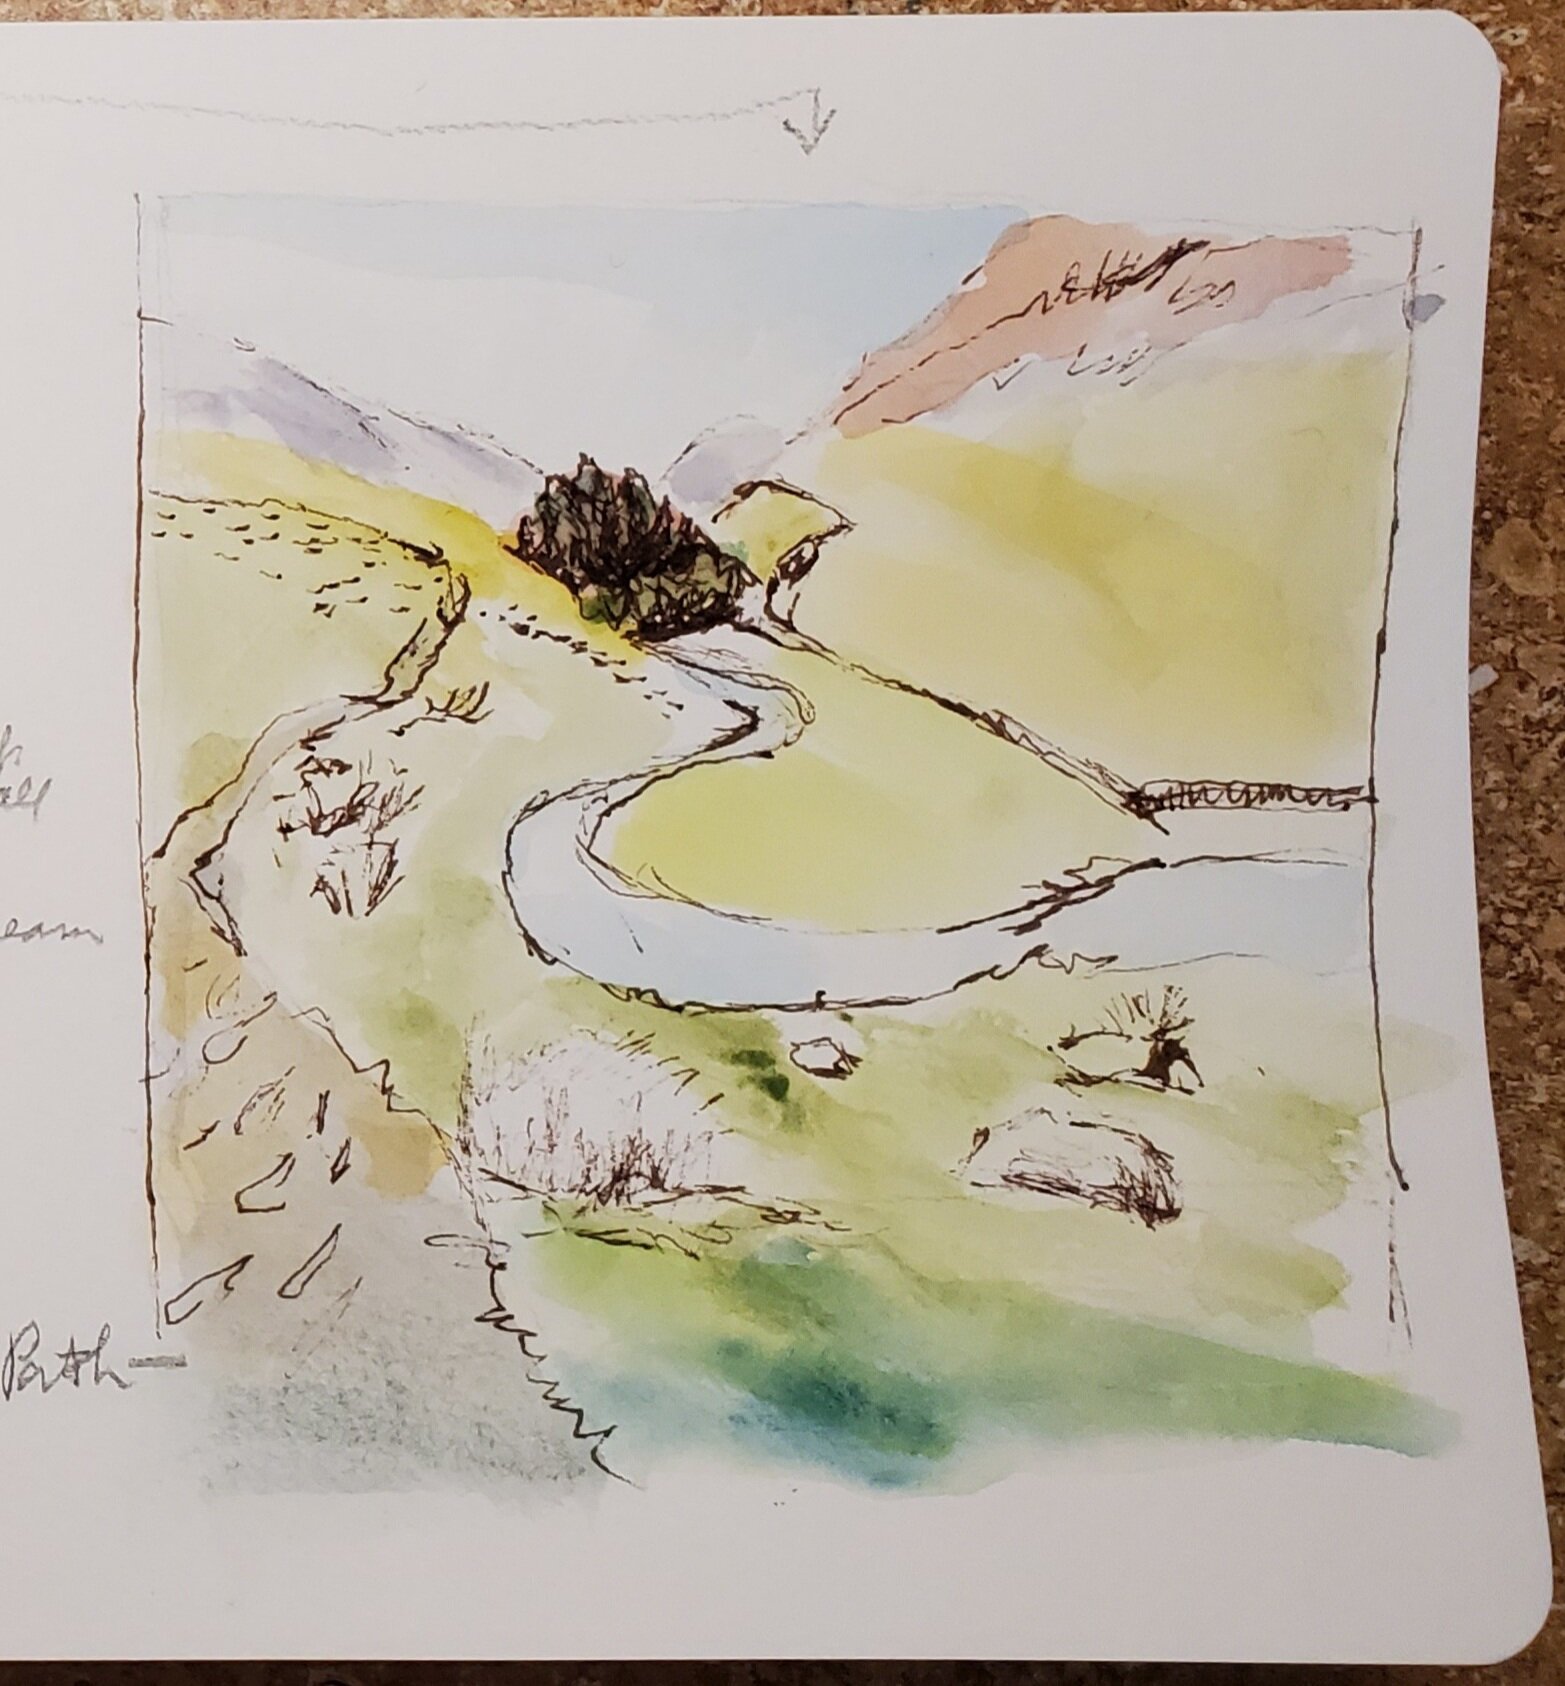 Kathy B – PARTICIPANT SKETCH FROM WORKSHOP